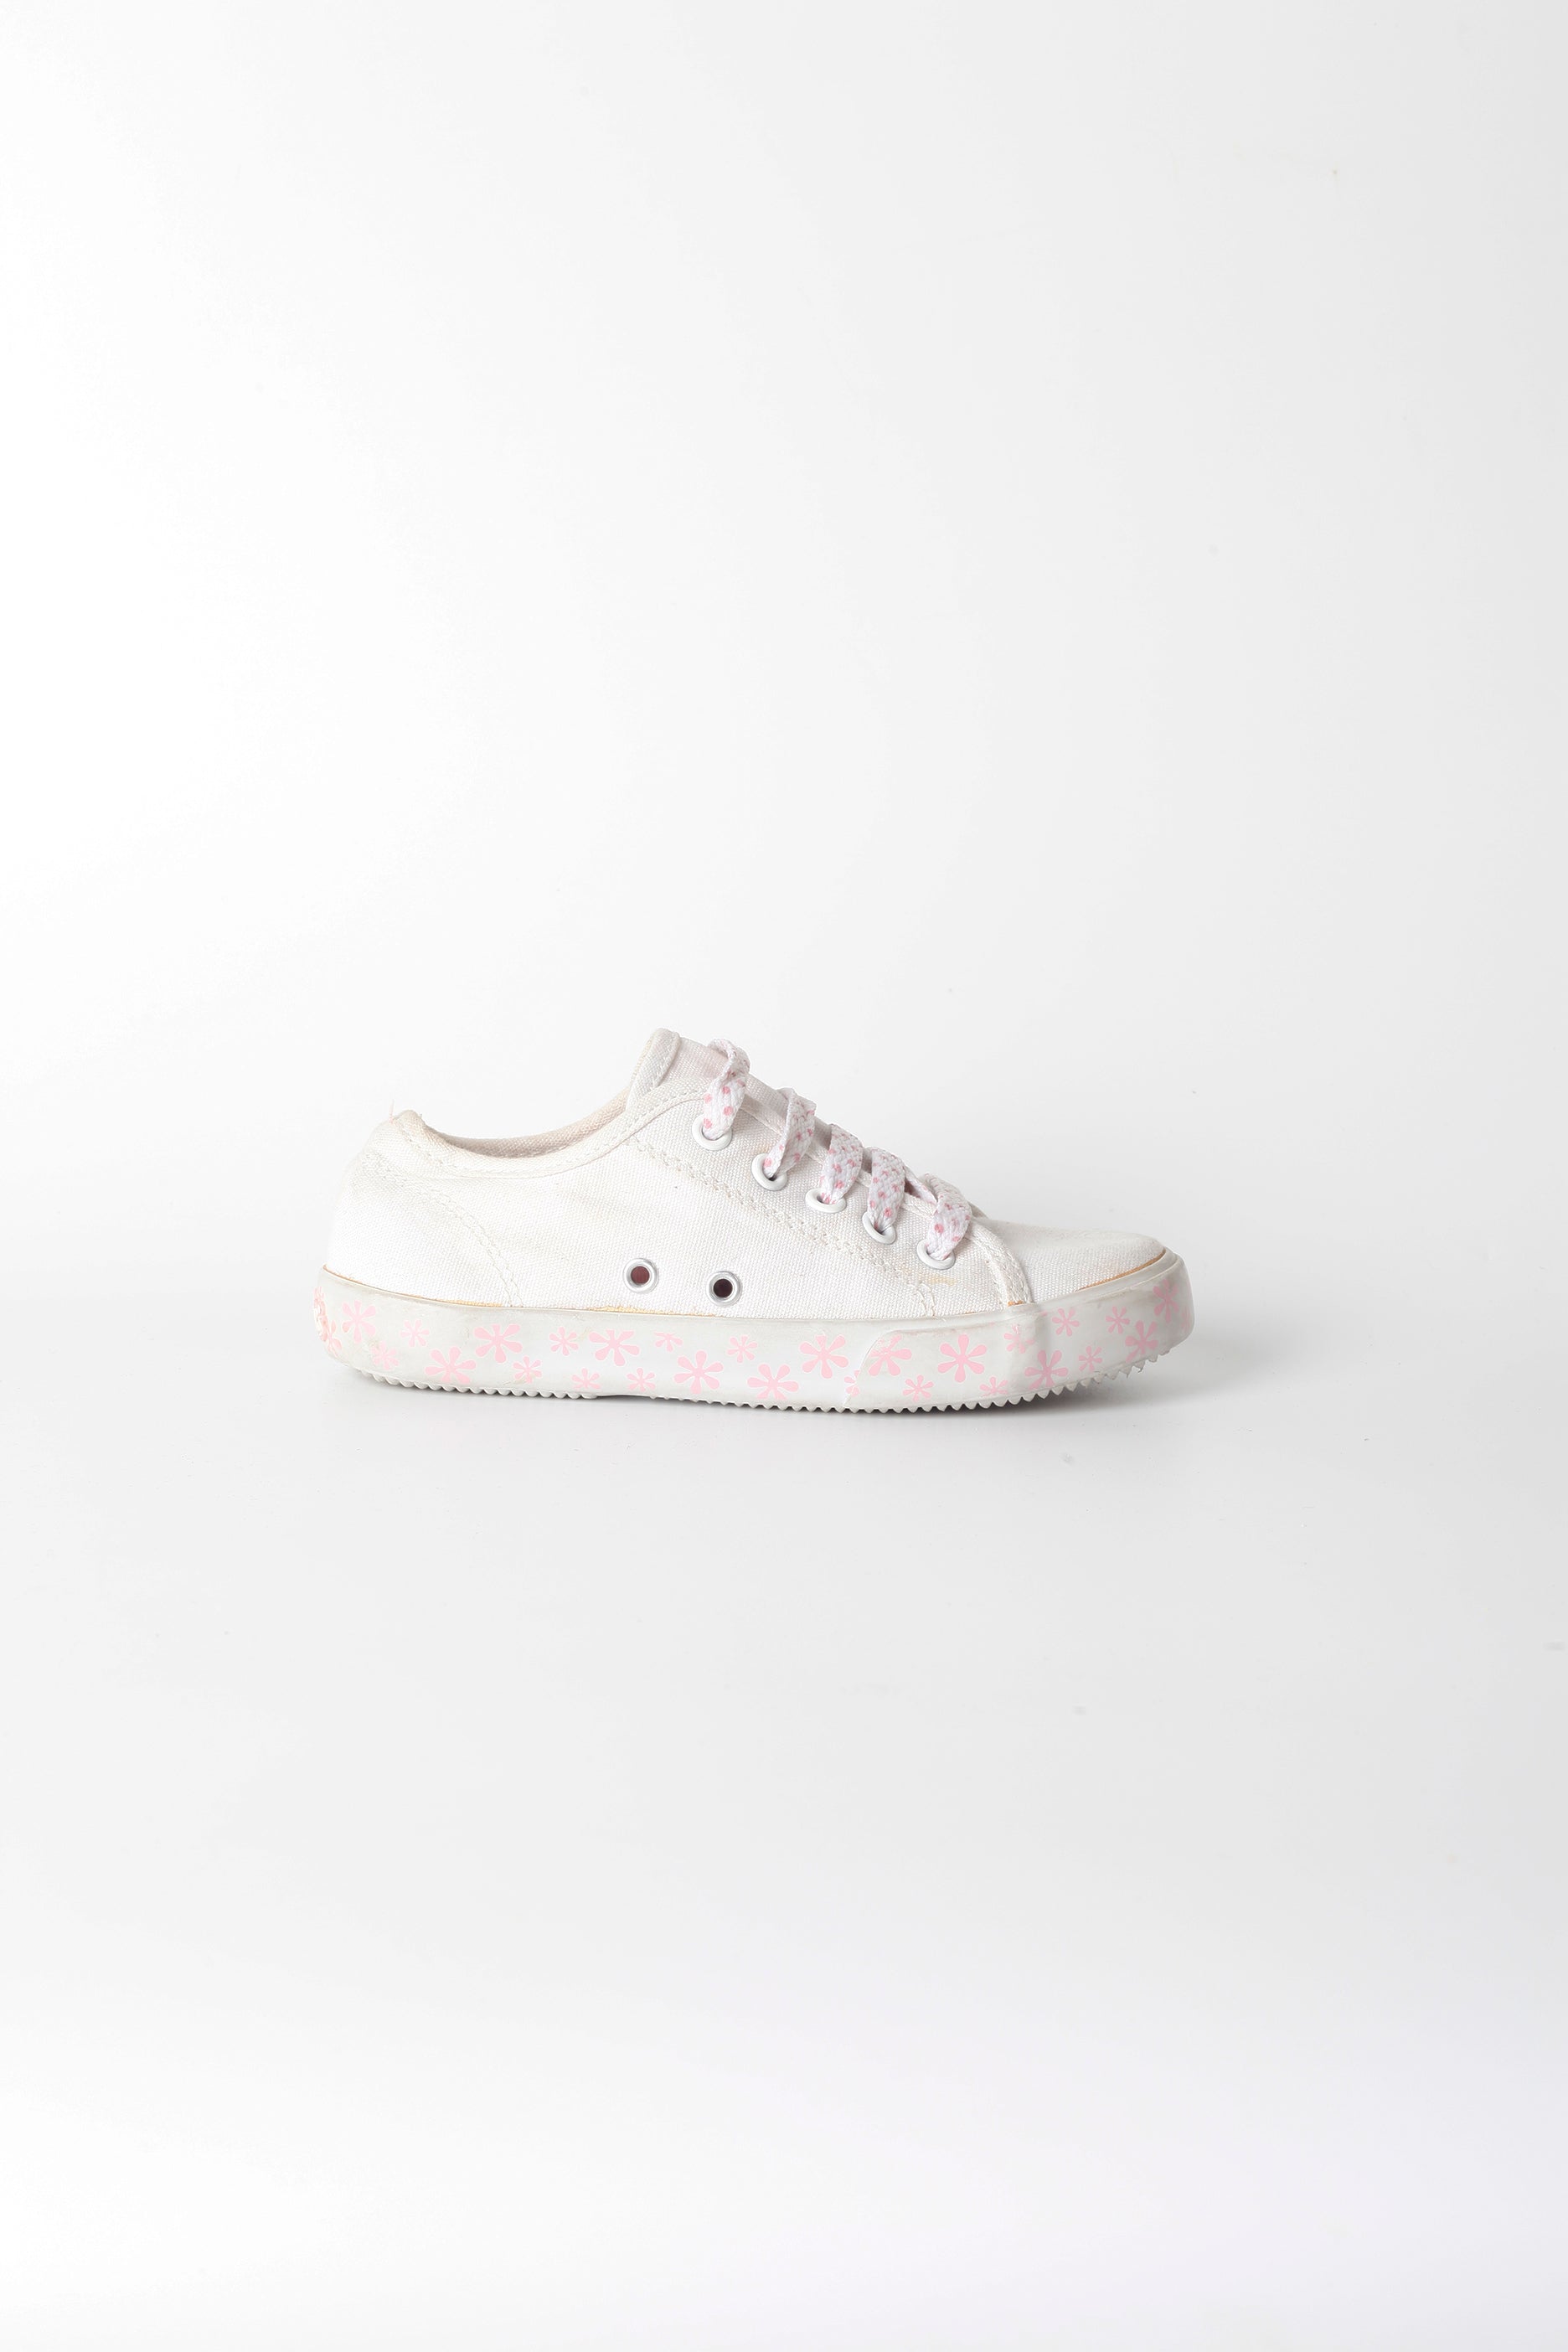 Girls White Sneakers with Polka Dot Laces